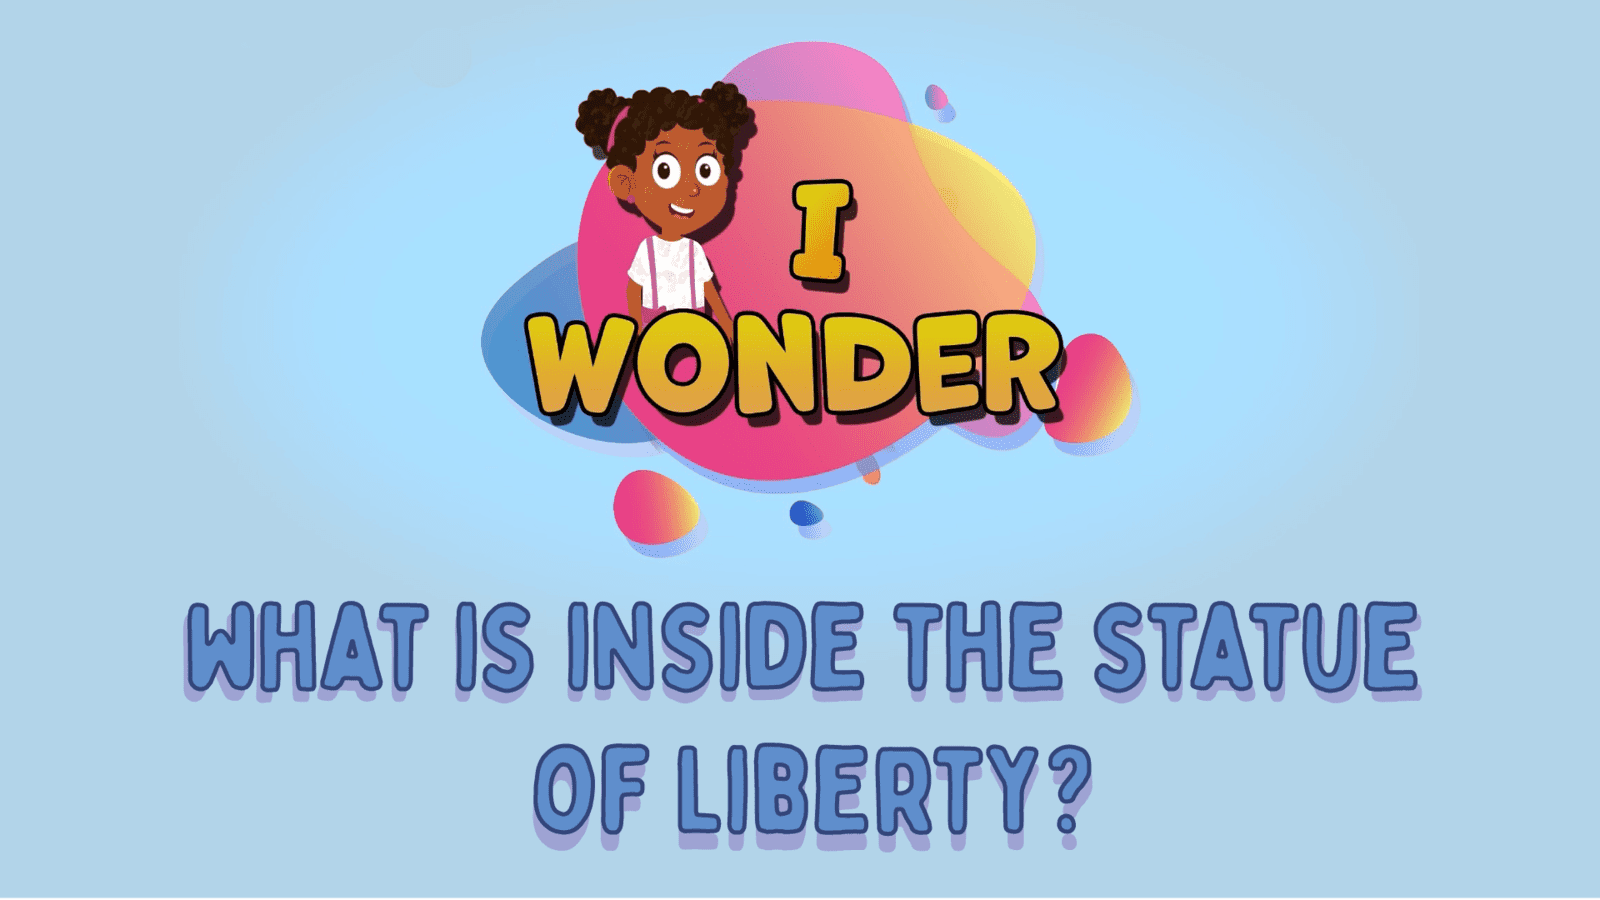 What Is Inside The Statue Of Liberty?